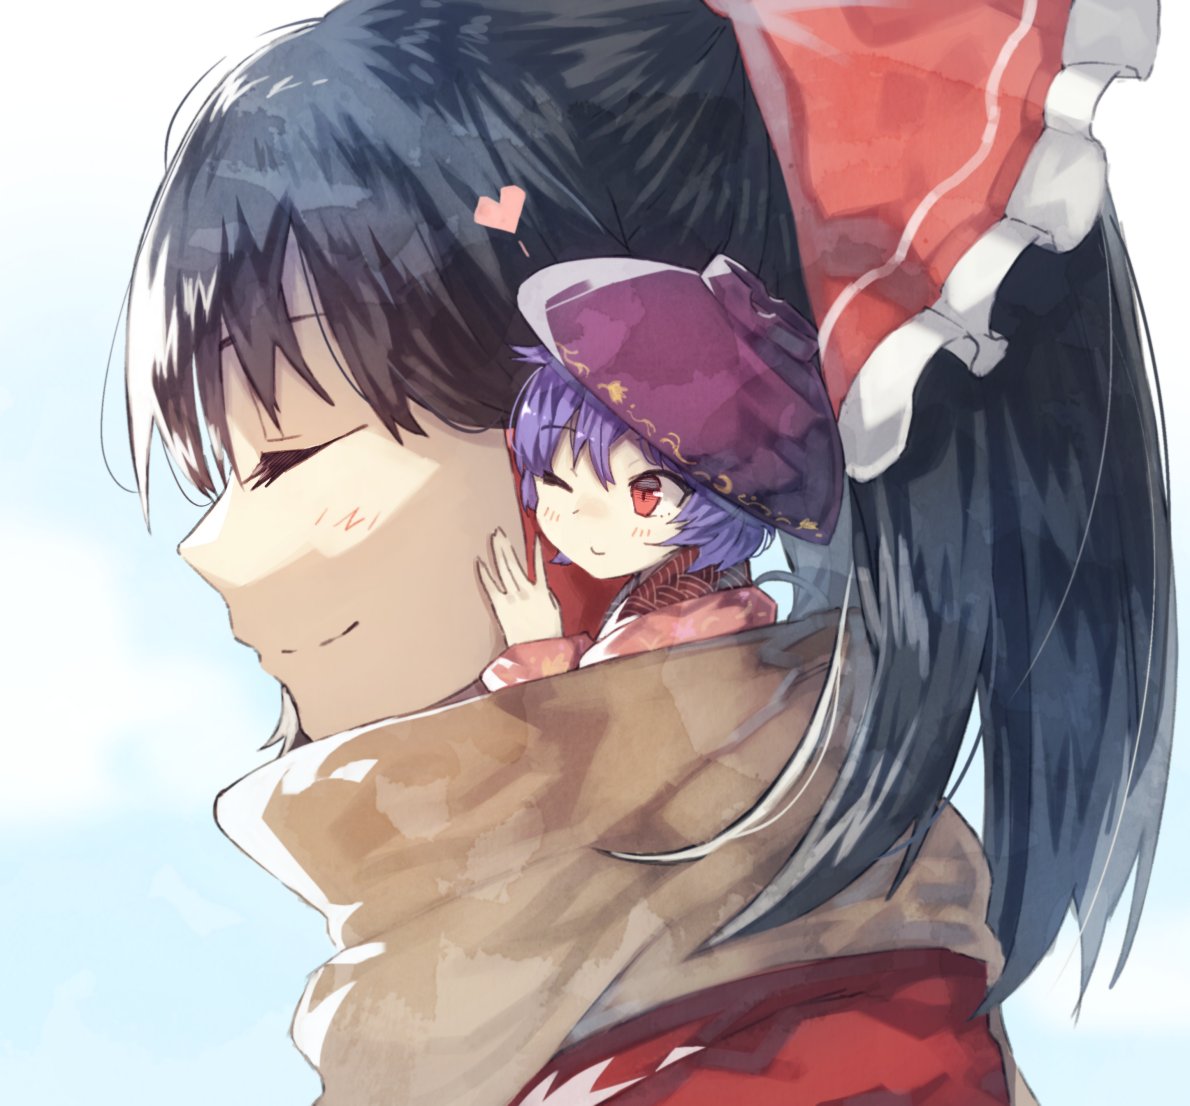 2girls ;) bangs bei_mochi black_hair bow bowl bowl_hat brown_scarf closed_eyes closed_mouth from_side hair_bow hakurei_reimu hat heart japanese_clothes kimono long_hair minigirl multiple_girls one_eye_closed profile red_bow red_eyes smile sukuna_shinmyoumaru touhou upper_body violet_eyes